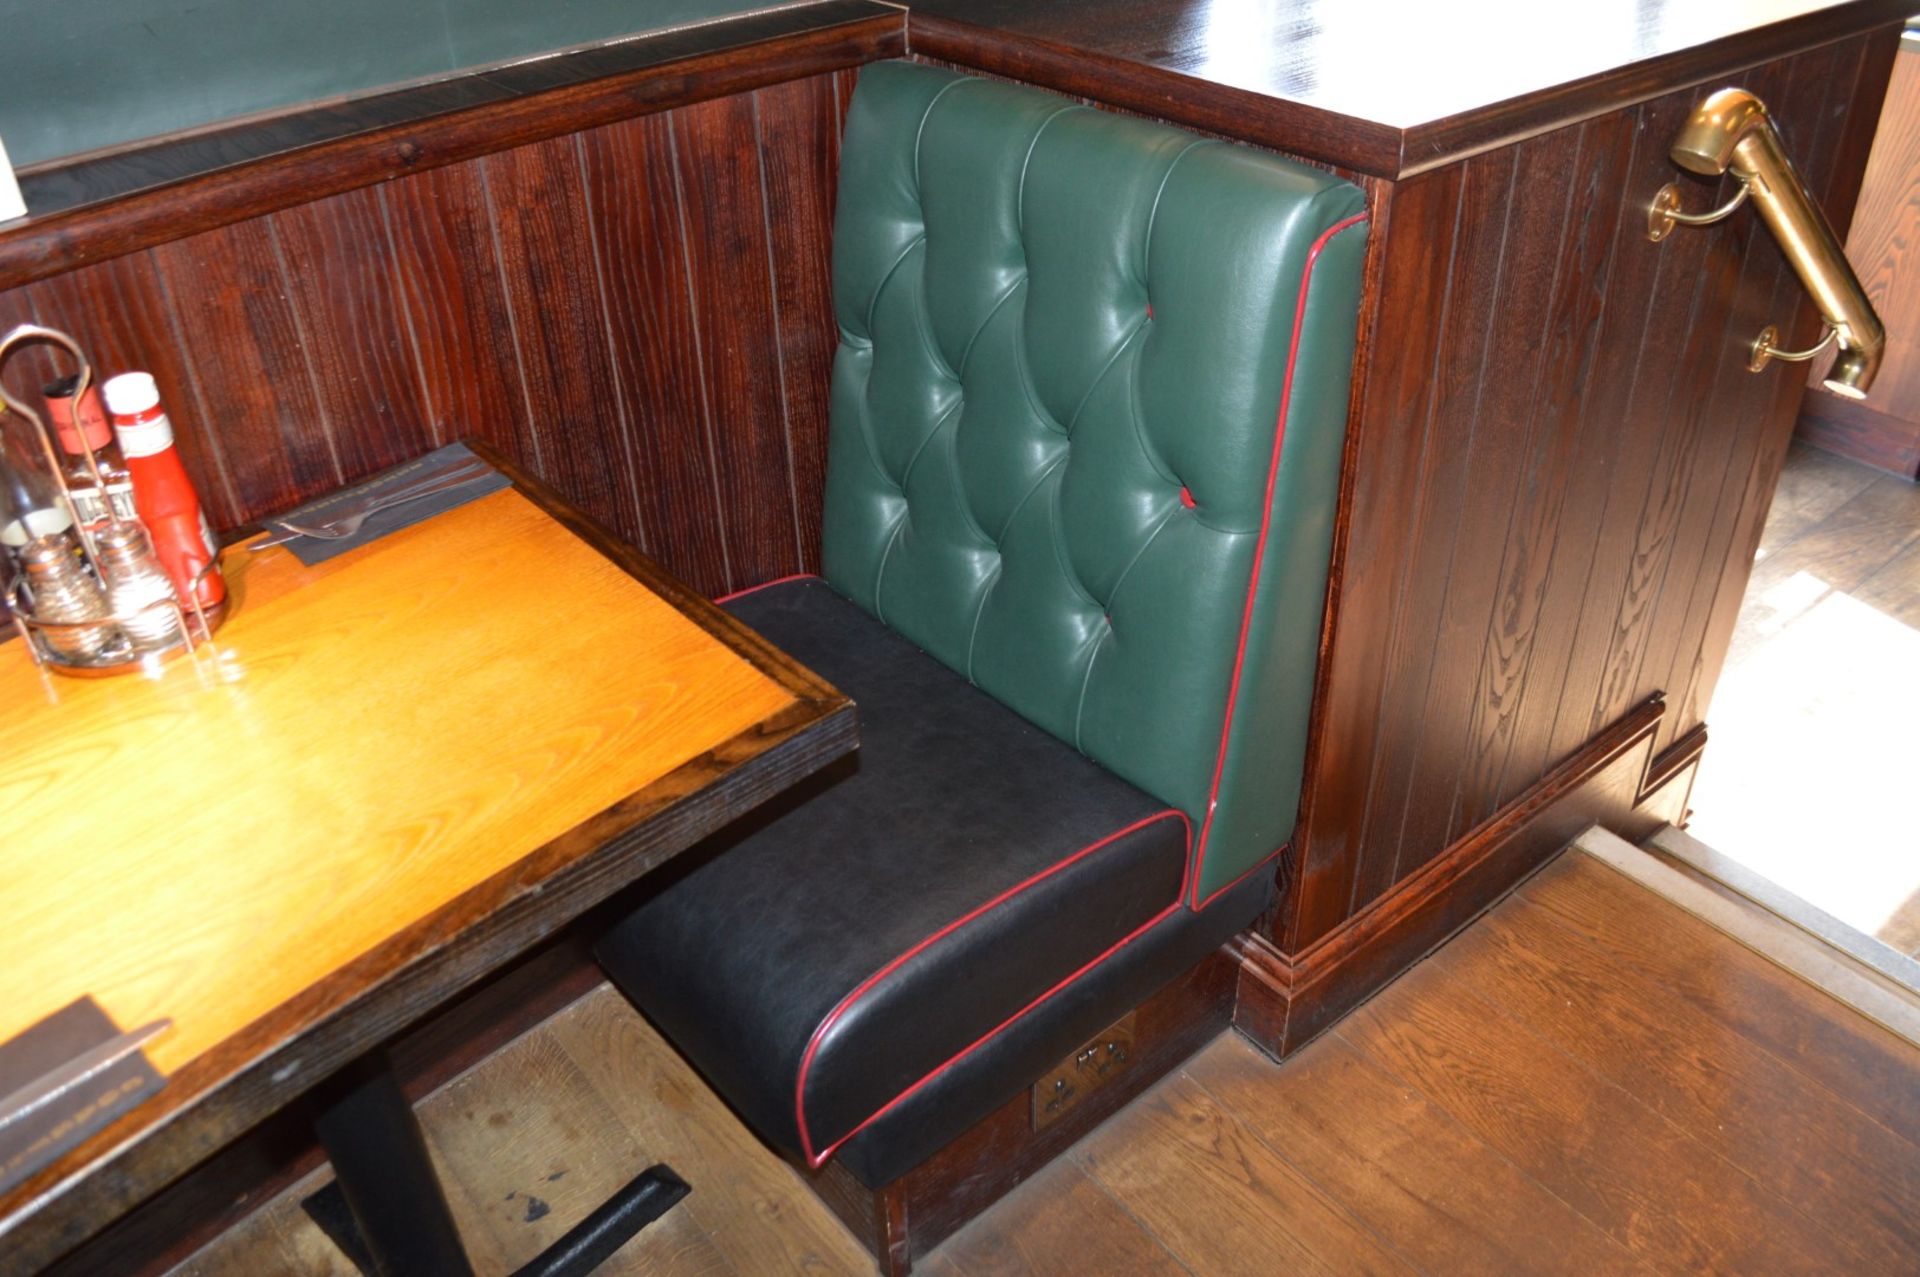 3 x Sections of Restaurant Booth Seating - Include 2 x Single Seats and 1 x Single Back to Back Seat - Image 6 of 12